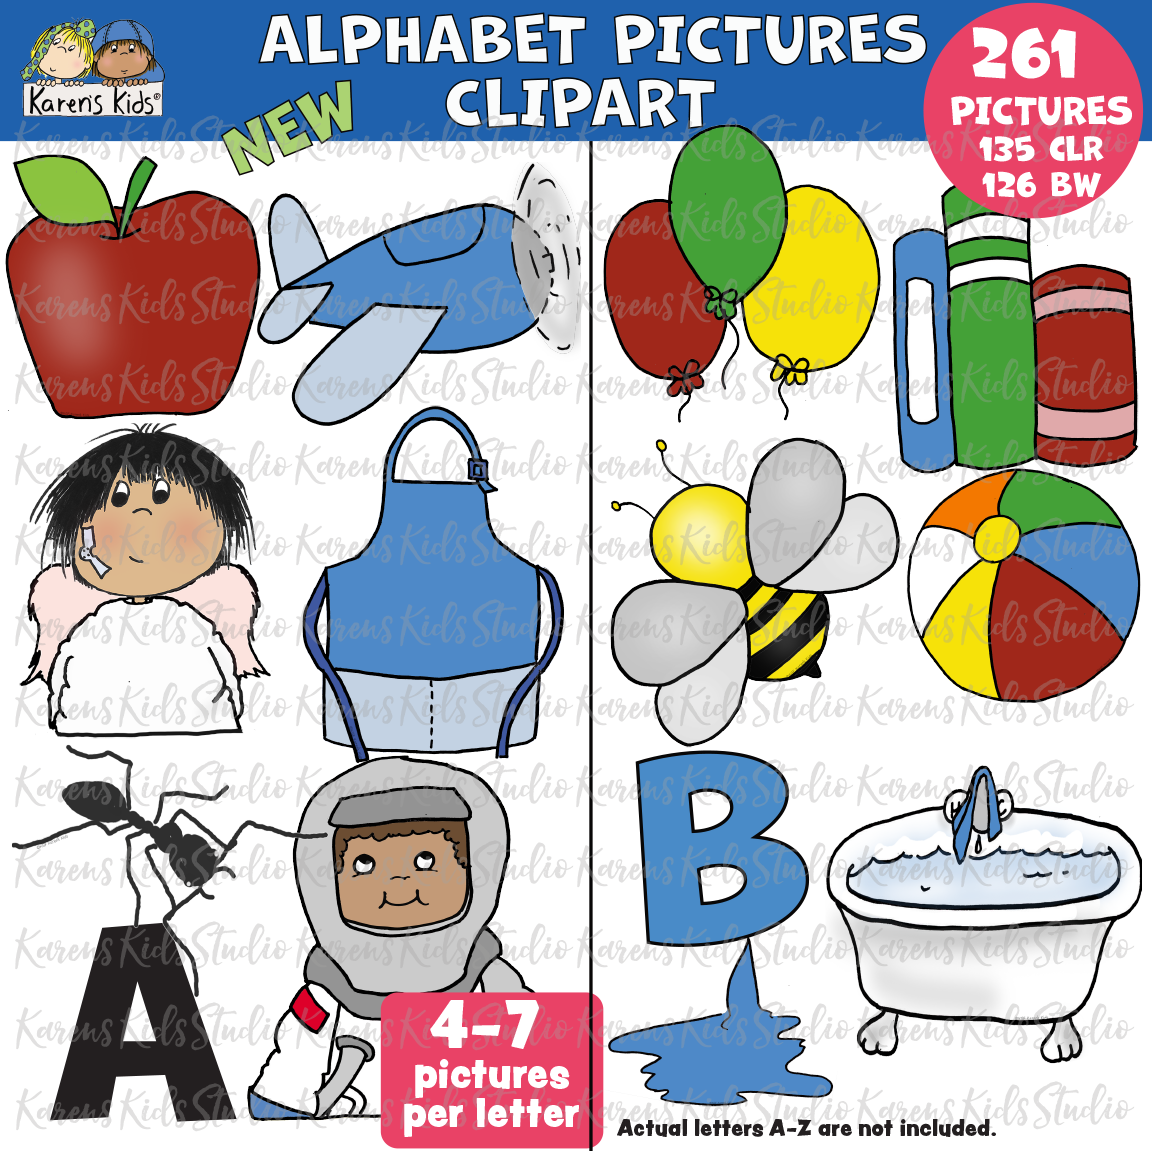 Colorful alphabet pictures clipart with 4-7 pictures per letter.